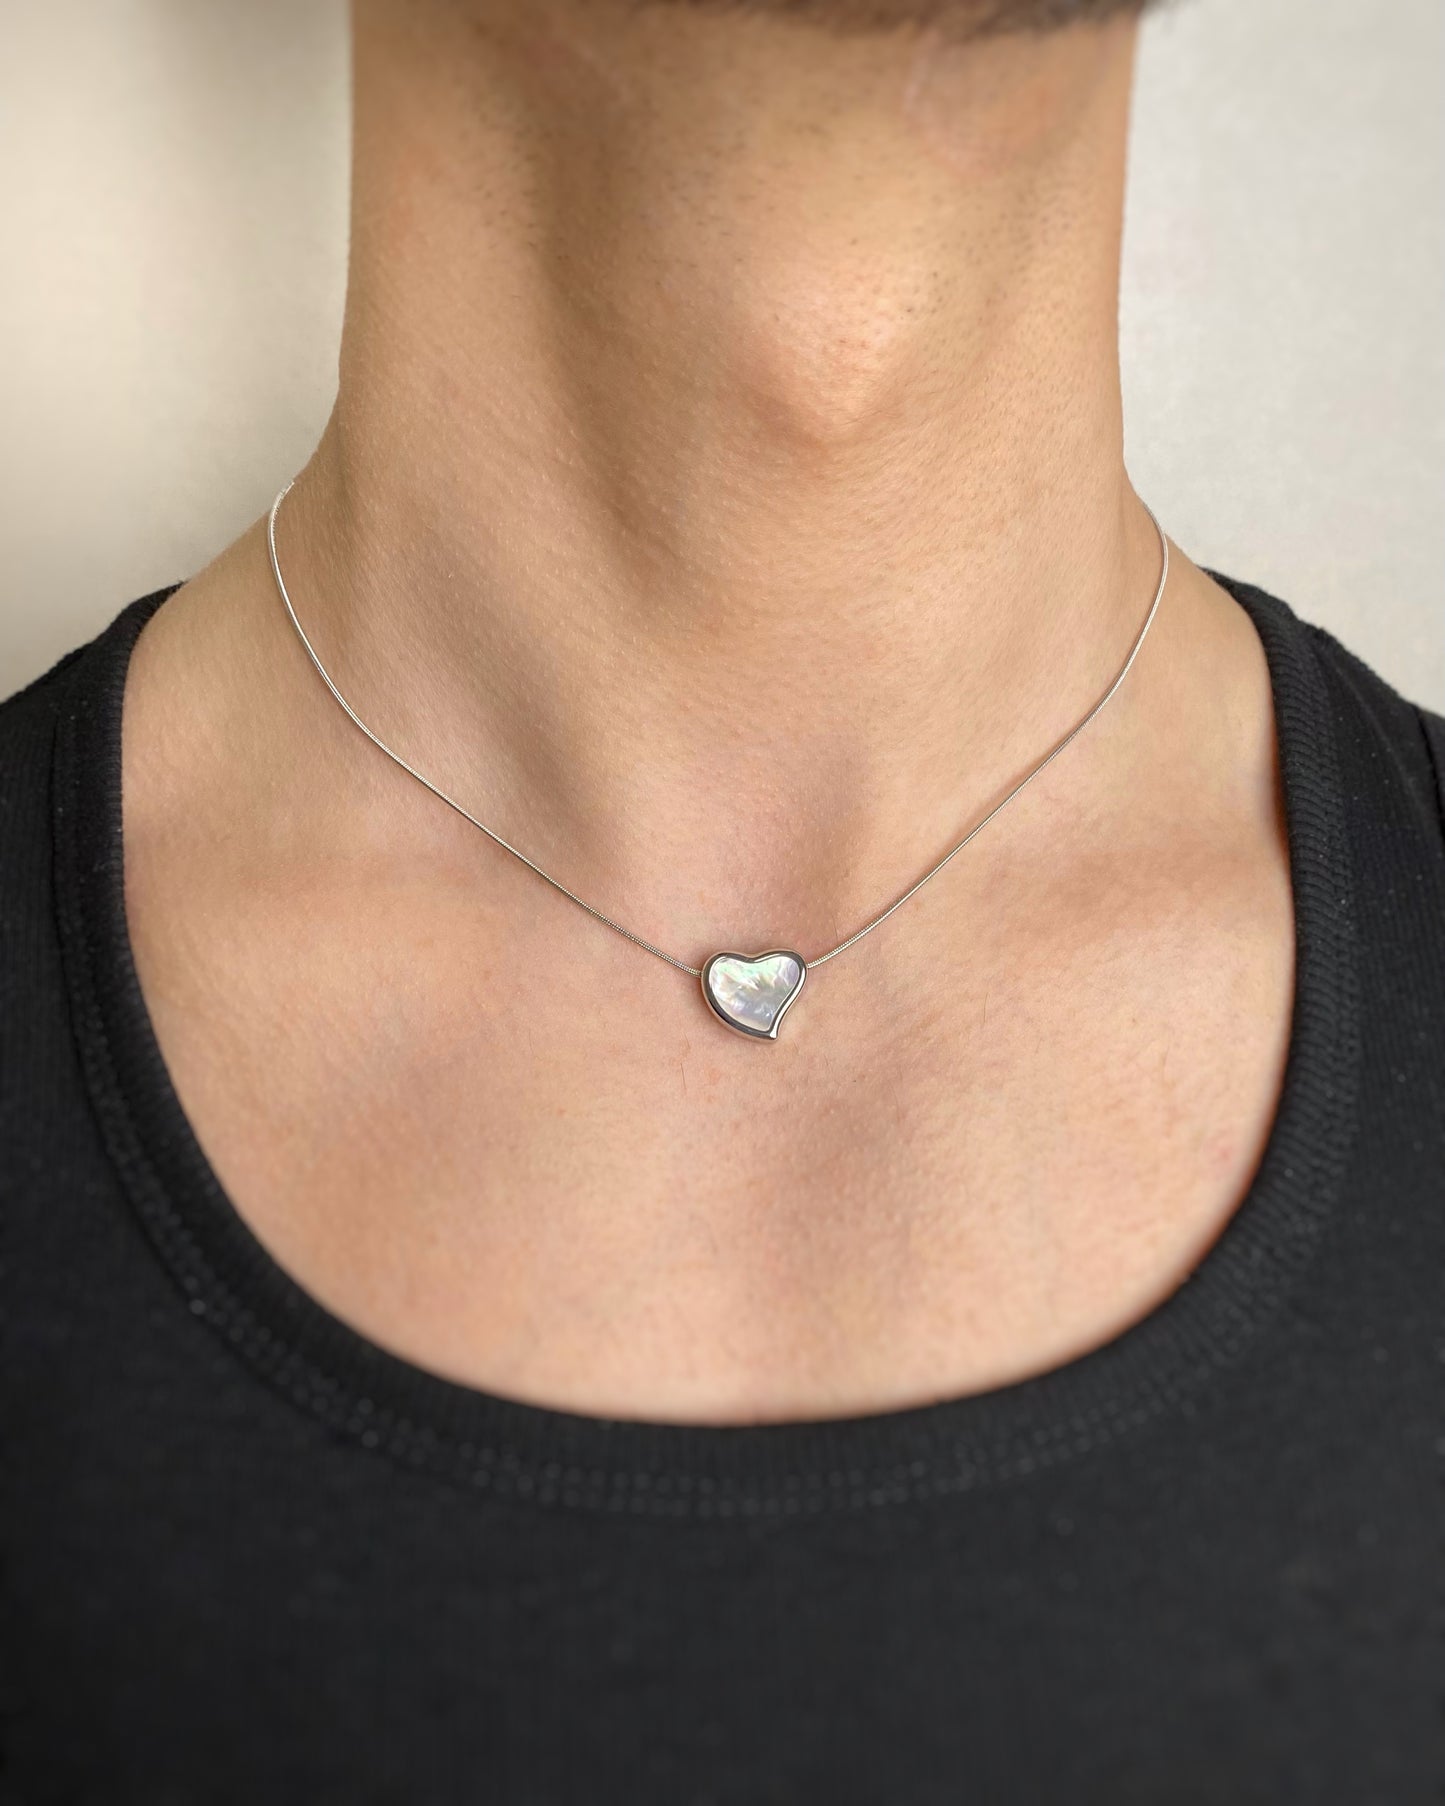 HEART MOTHER-OF-PEARL PENDANT NECKLACE